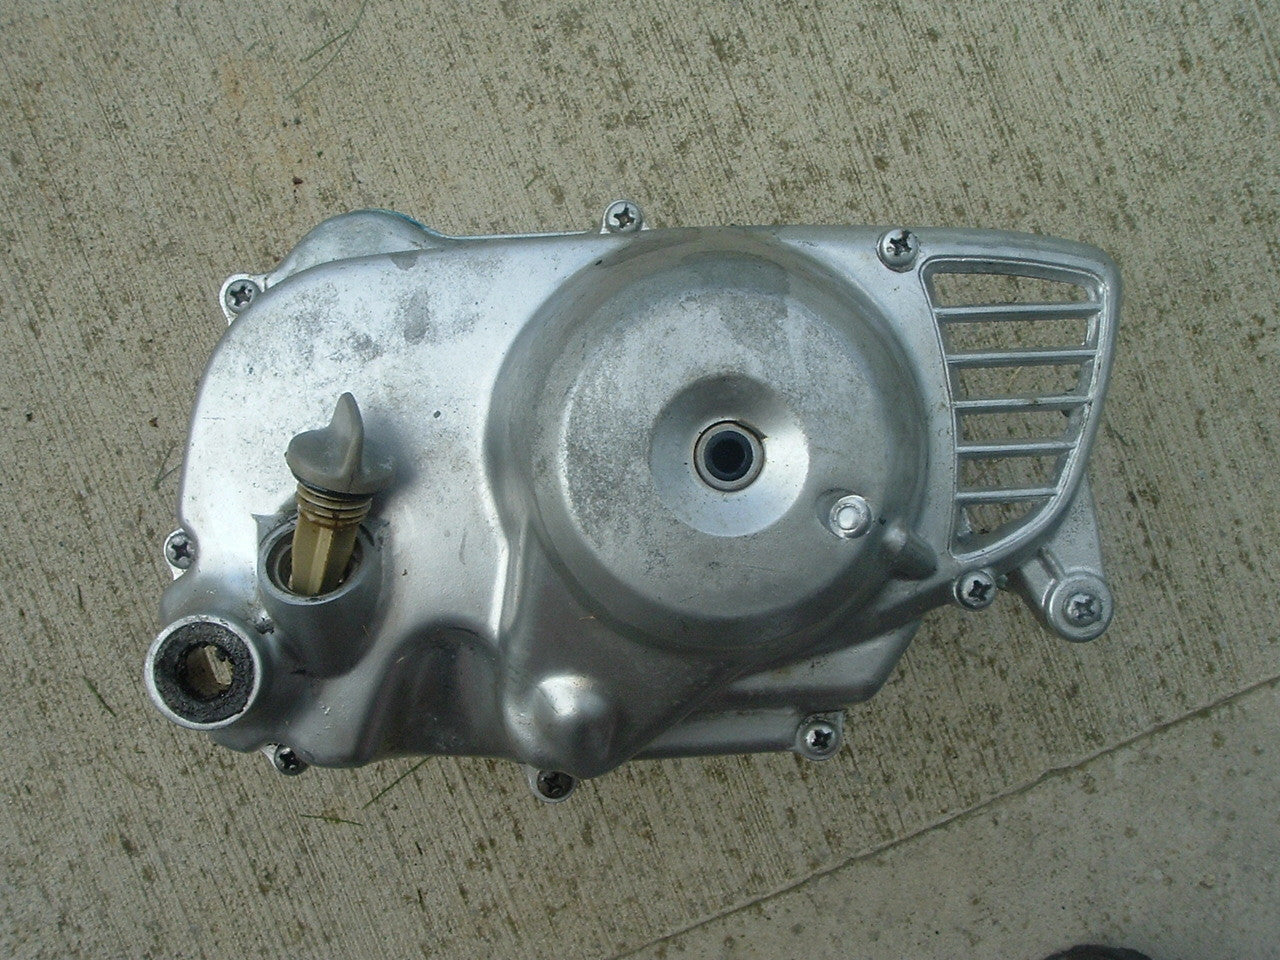 Sold by invoice 11/1/16 $29.00 Honda C70 Engine Cover Right includes Dipstick